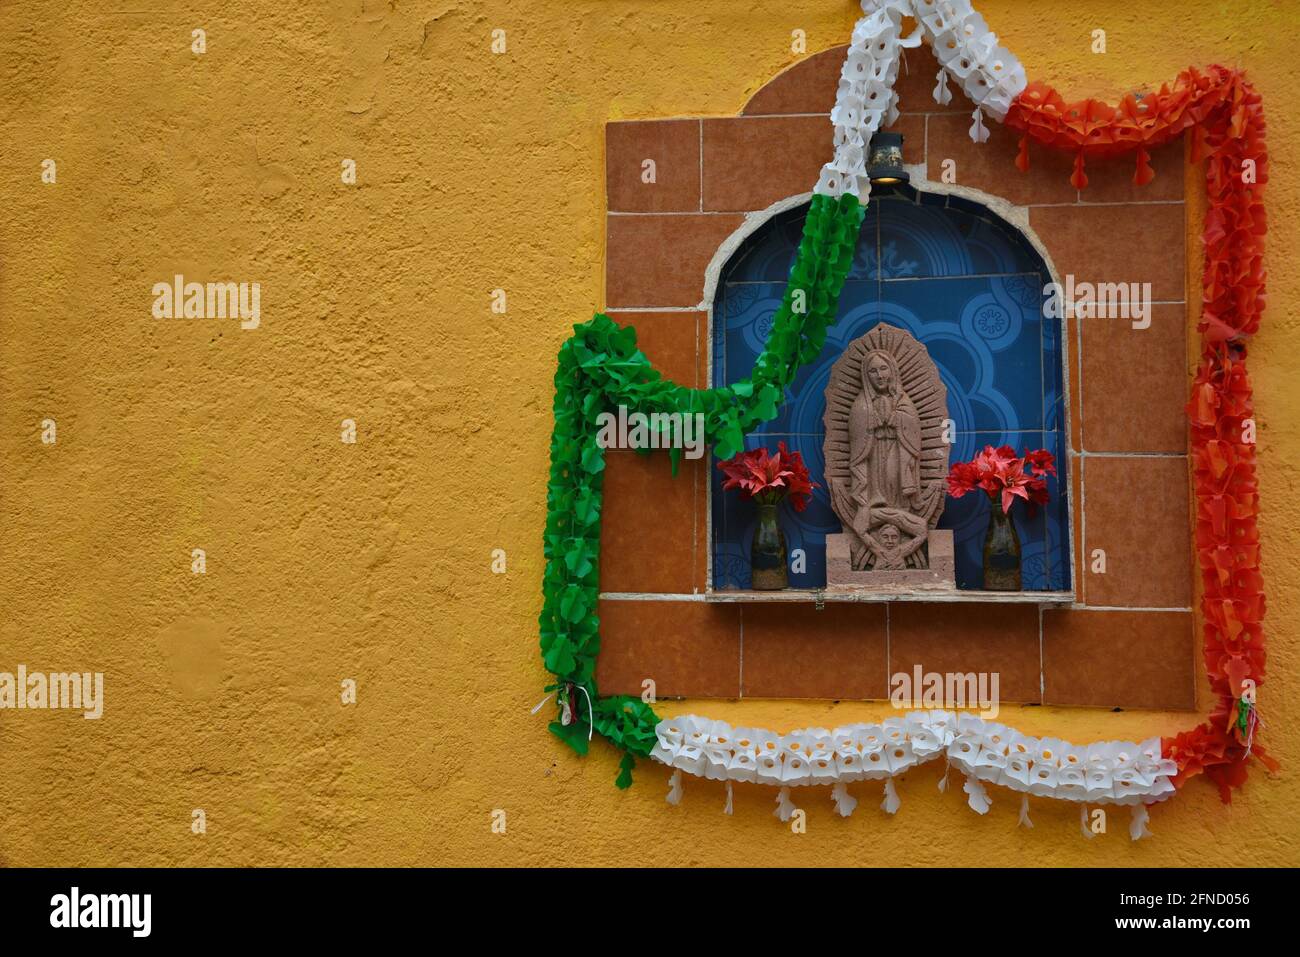 Ceramic tile religious icon decorated with a Mexican flag colors garland on an ochre stucco wall in the ghost town of Real de Catorce, Mexico. Stock Photo